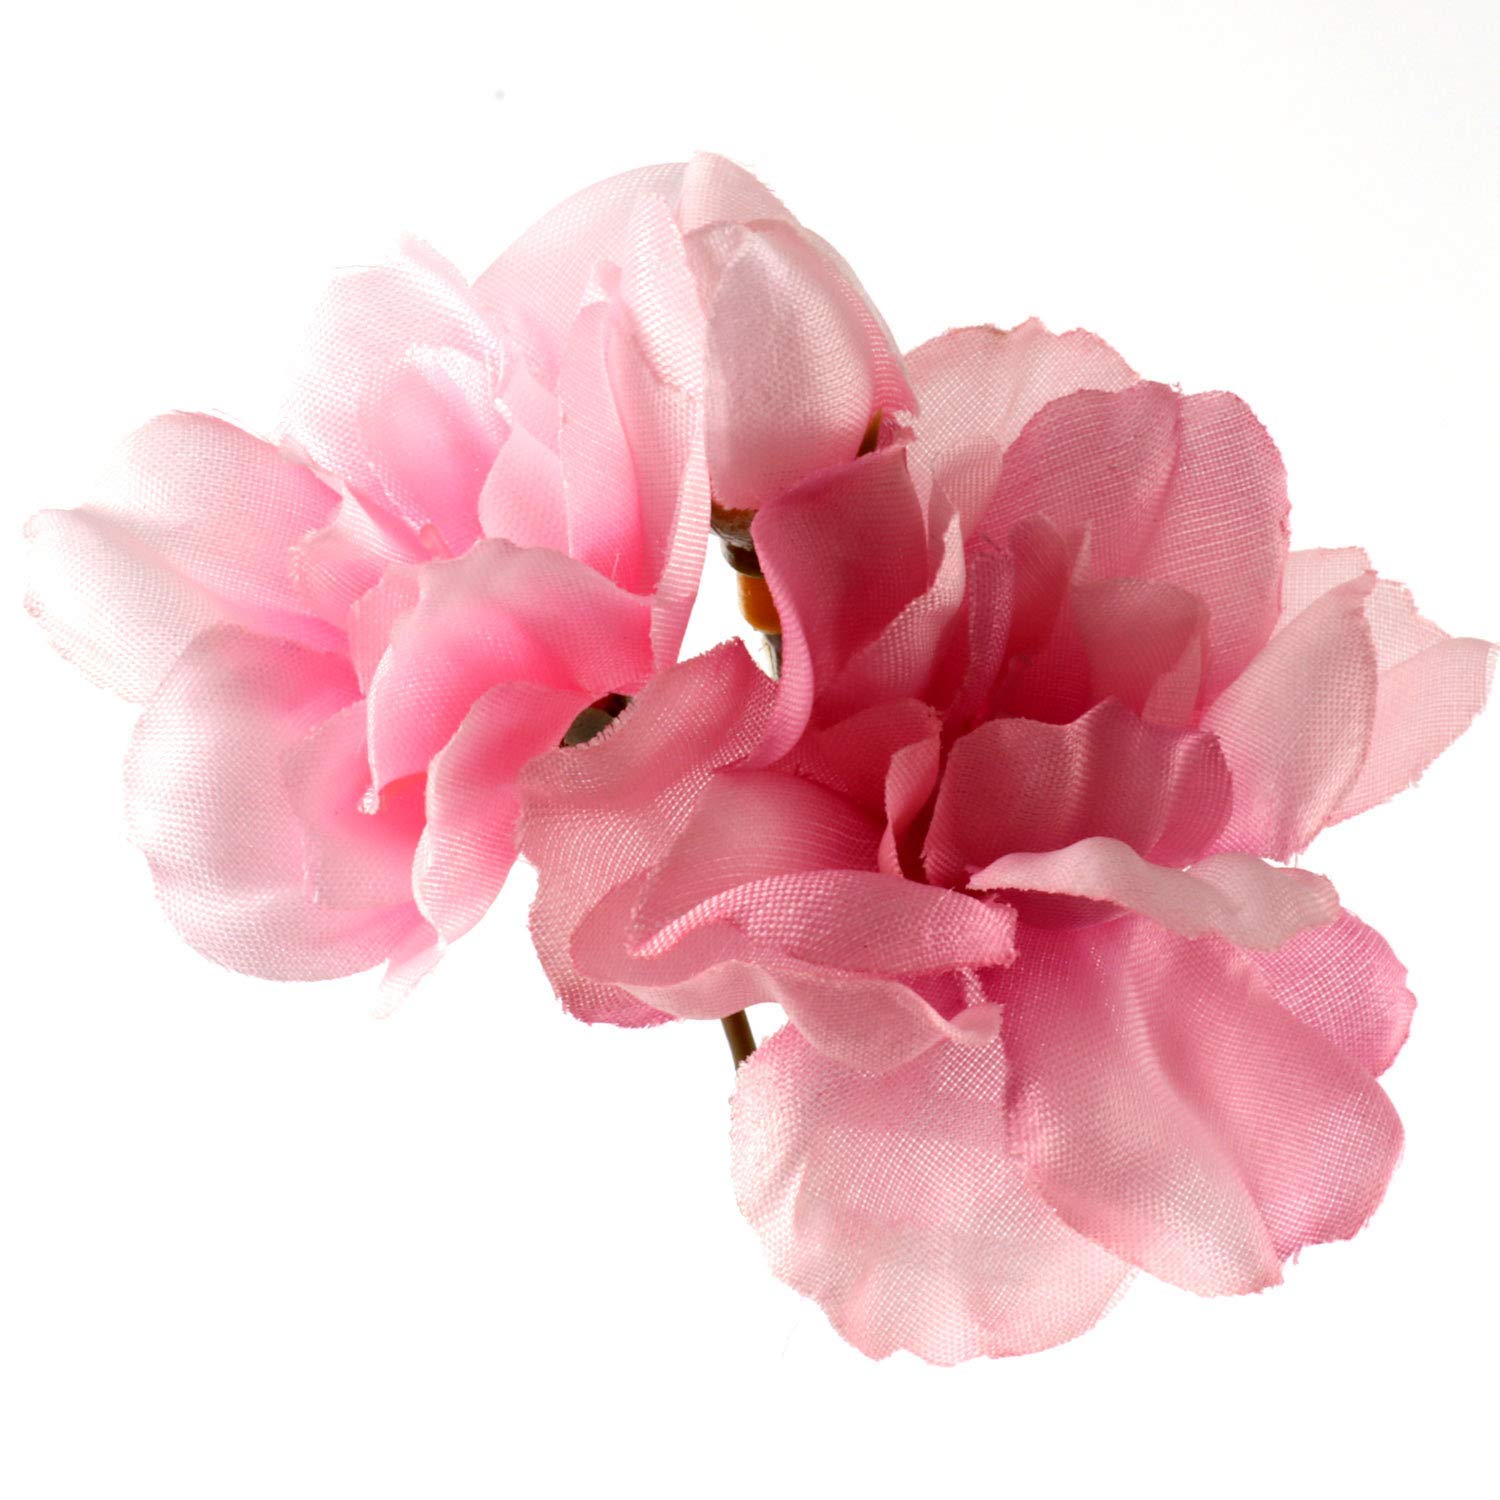 Pink 4.5' Cherry Blossom Garland - Realistic Faux Floral for Weddings, Home, Spring Events; Blossom for Mantels, Centerpieces & Celebrations